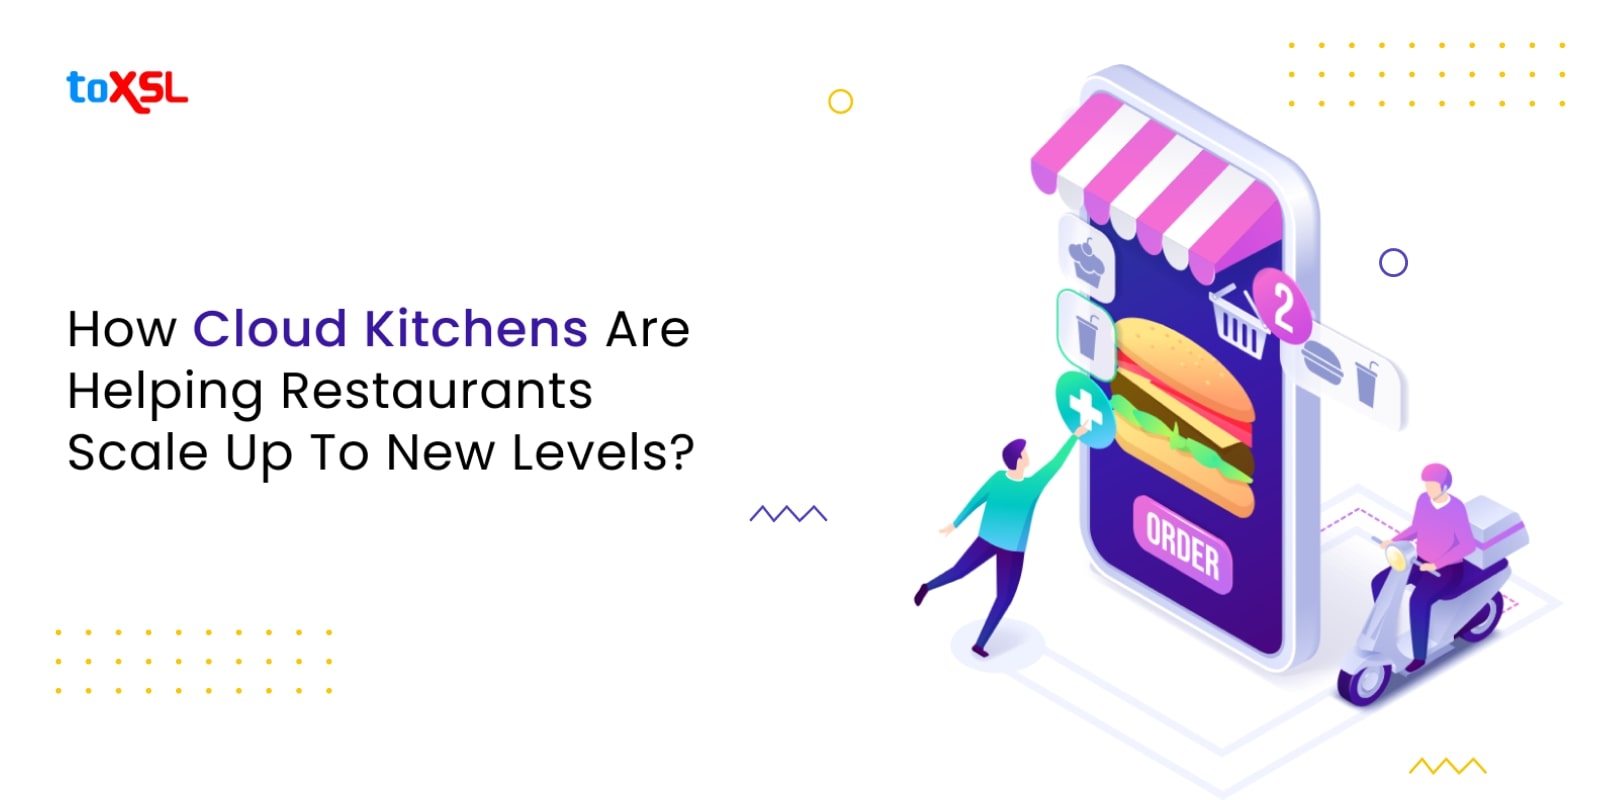 How Cloud Kitchens Are Helping Restaurants Scale Up To New Levels?